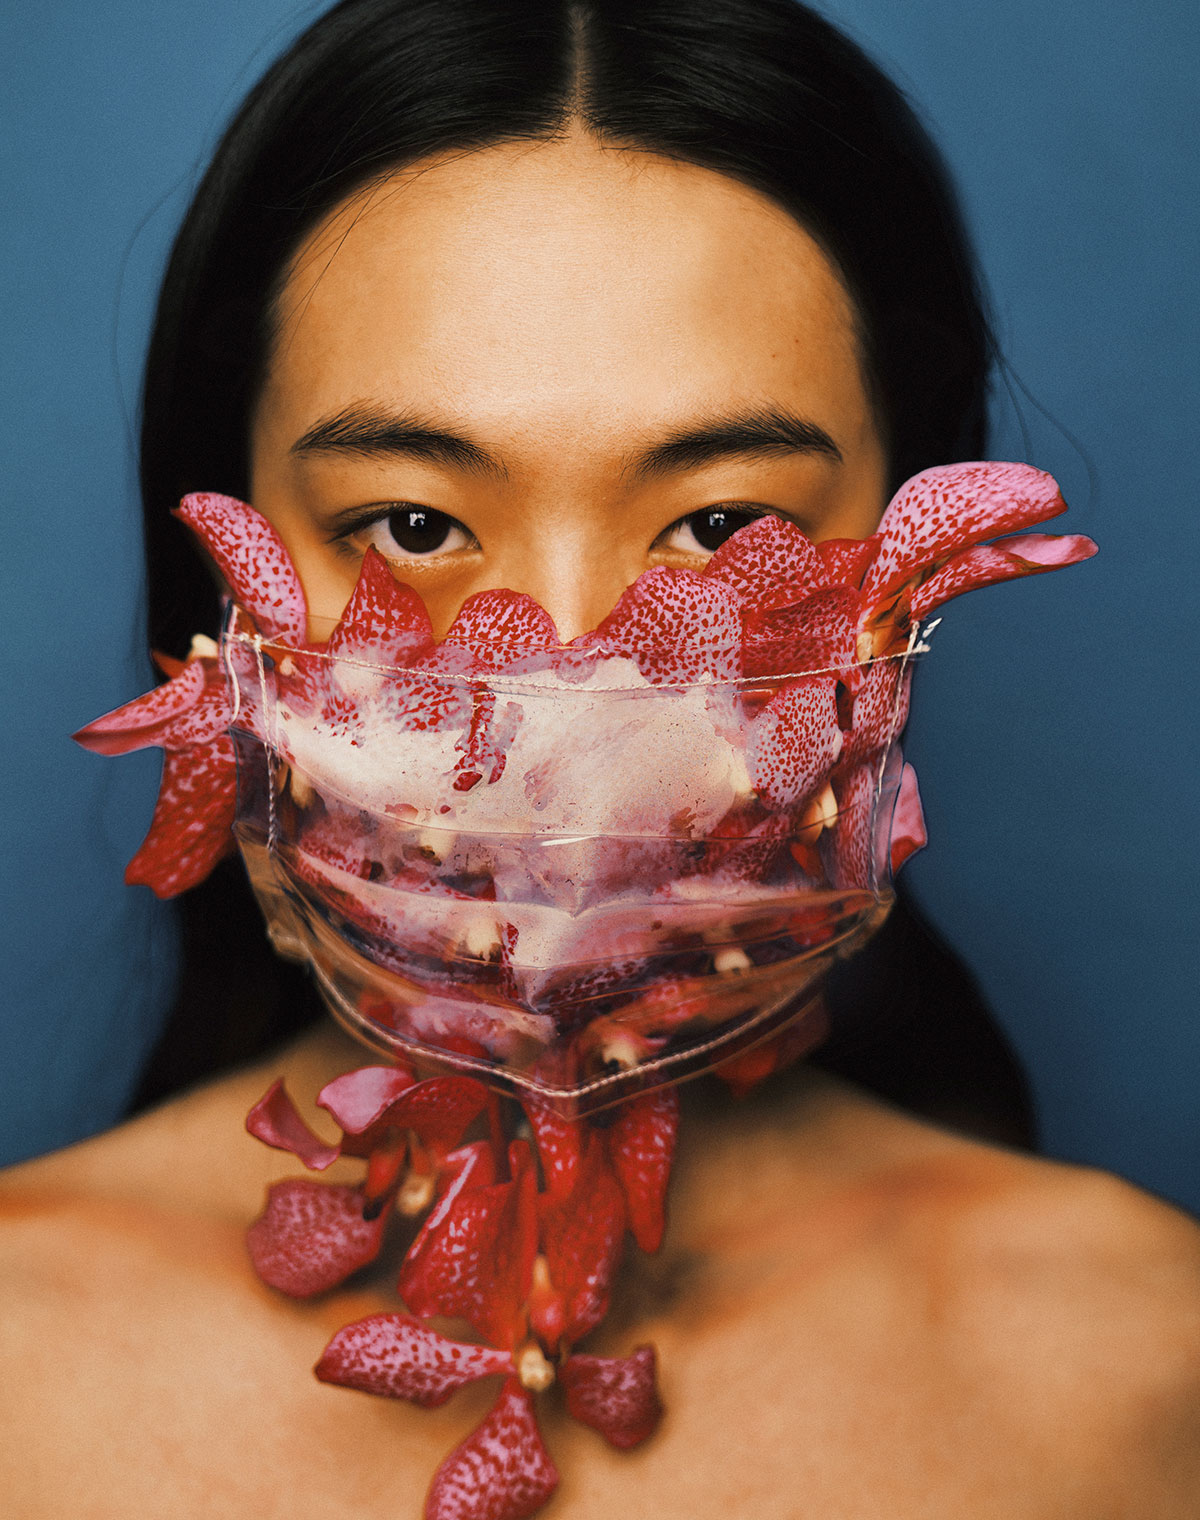 Zhong Lin Explores Art and Solitude During Isolation With 'Project 365' The Fashionography